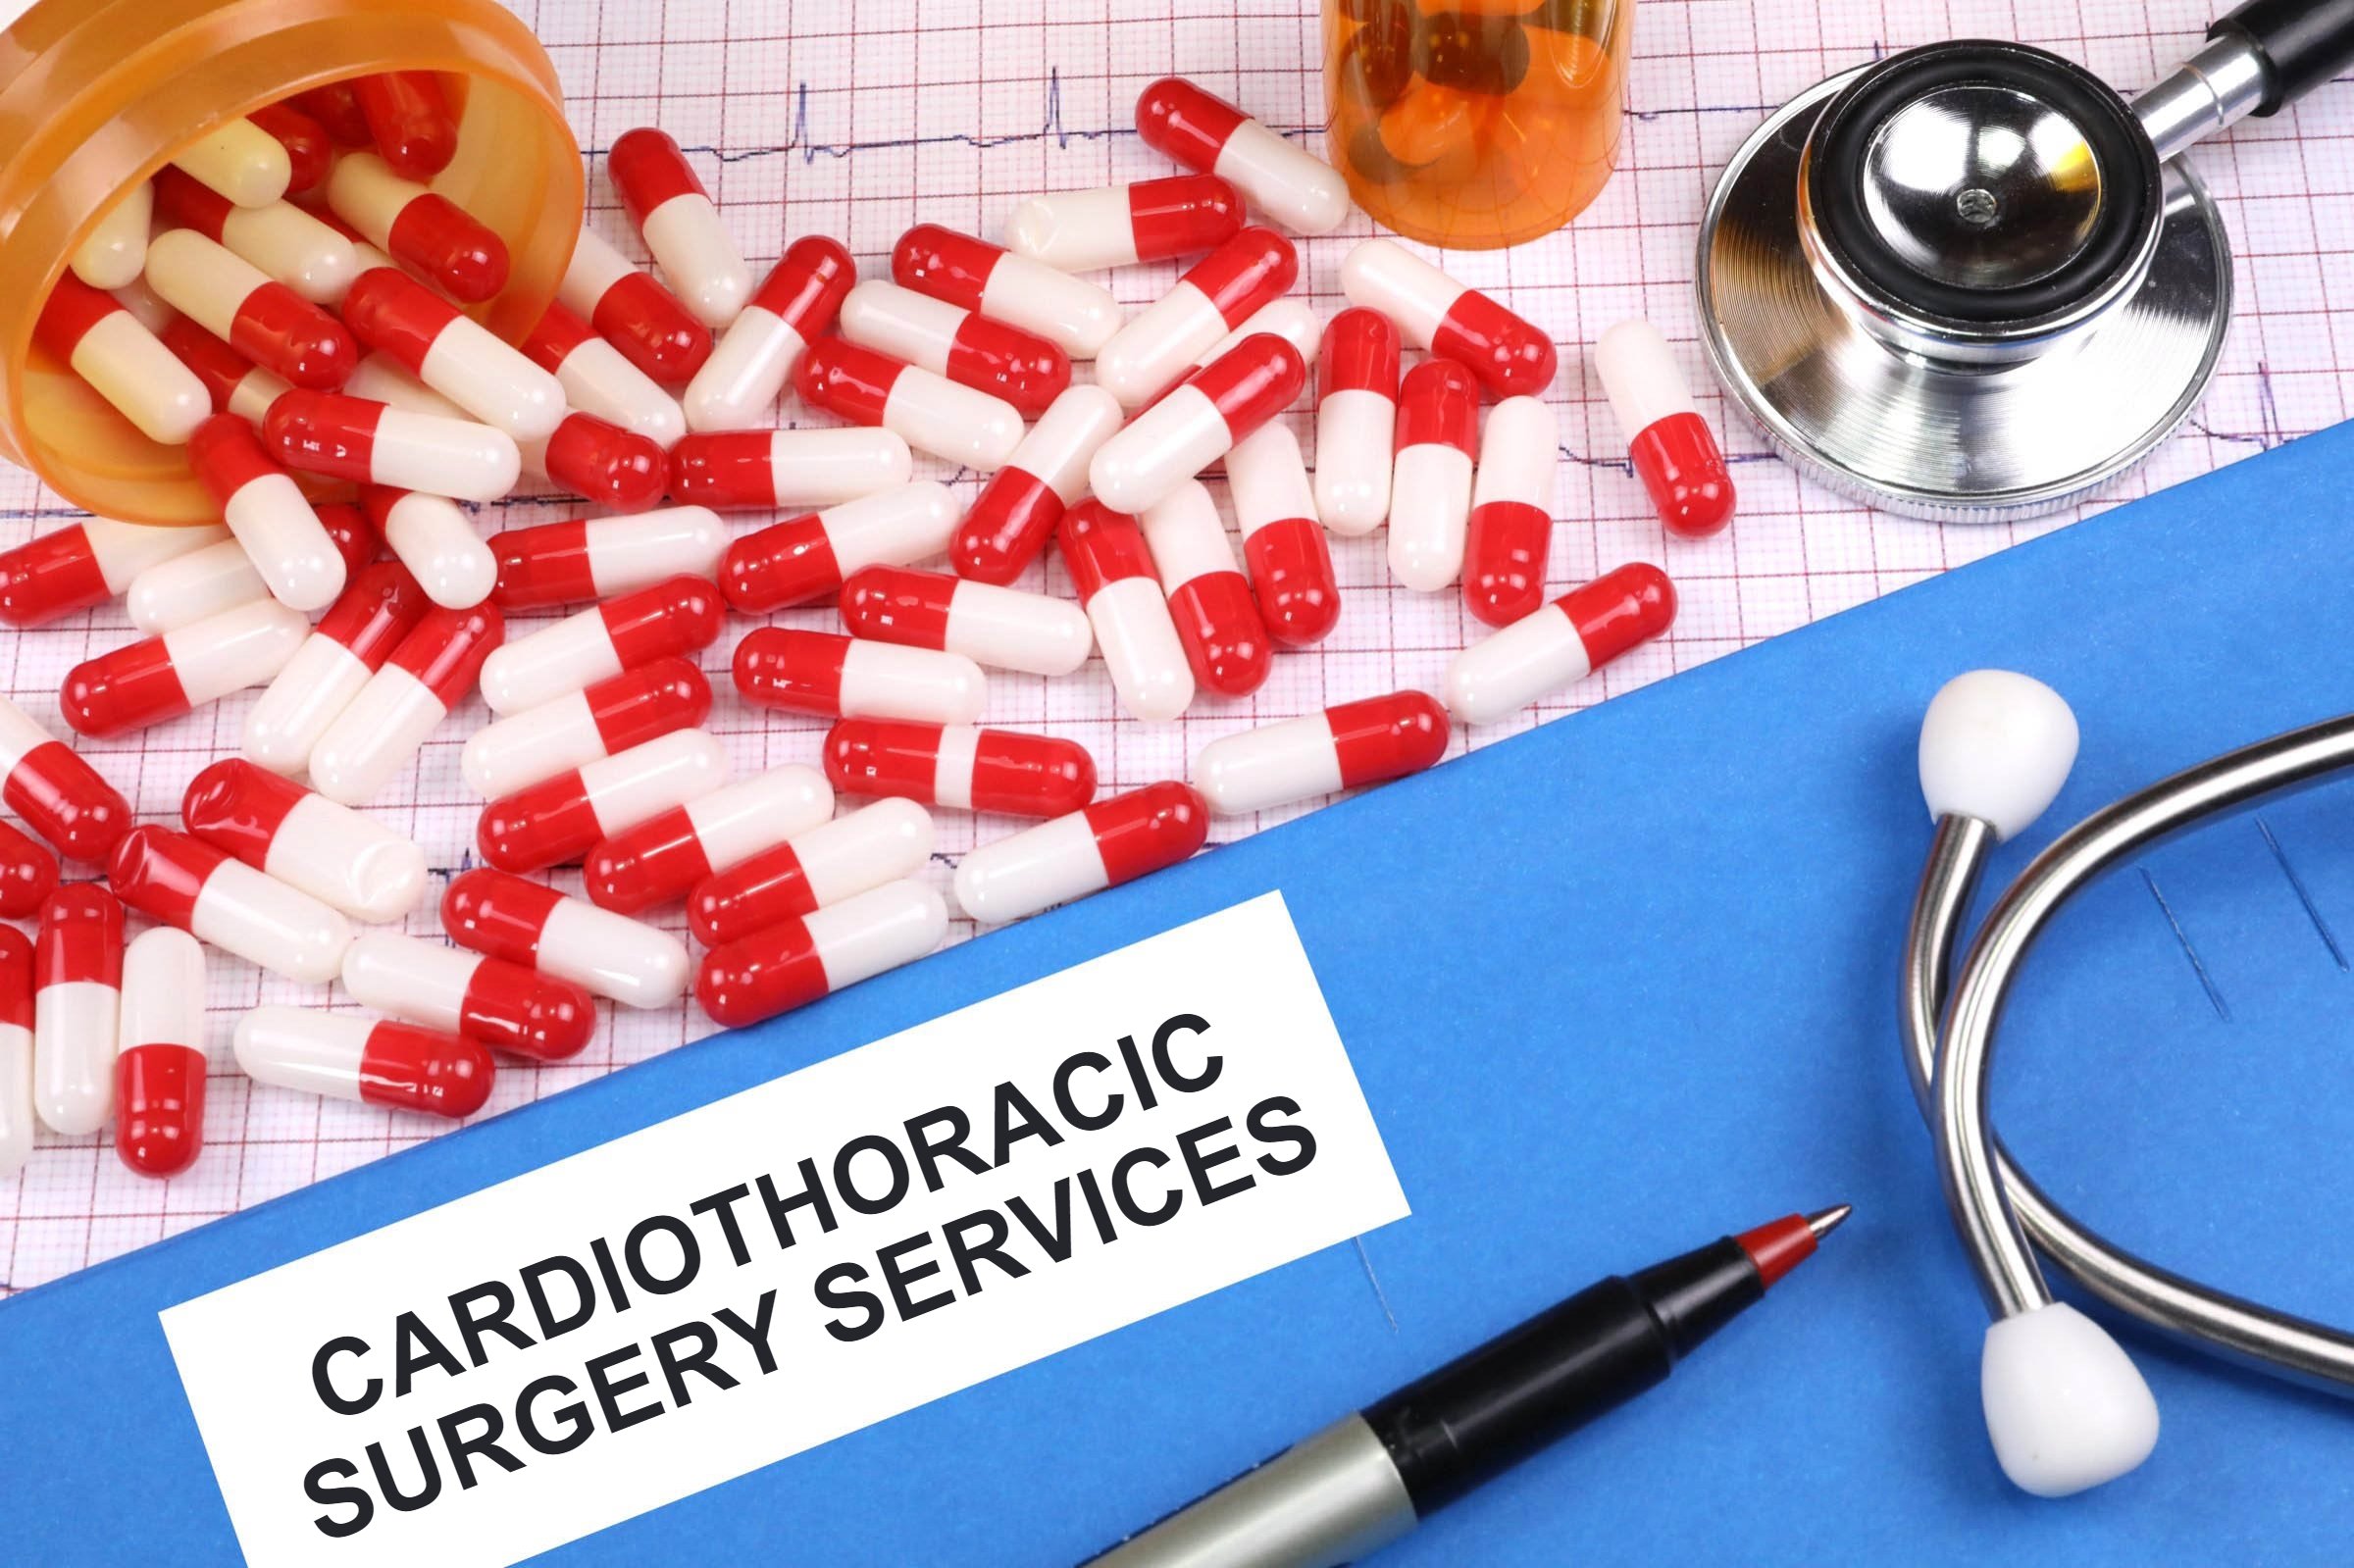 cardiothoracic surgery services